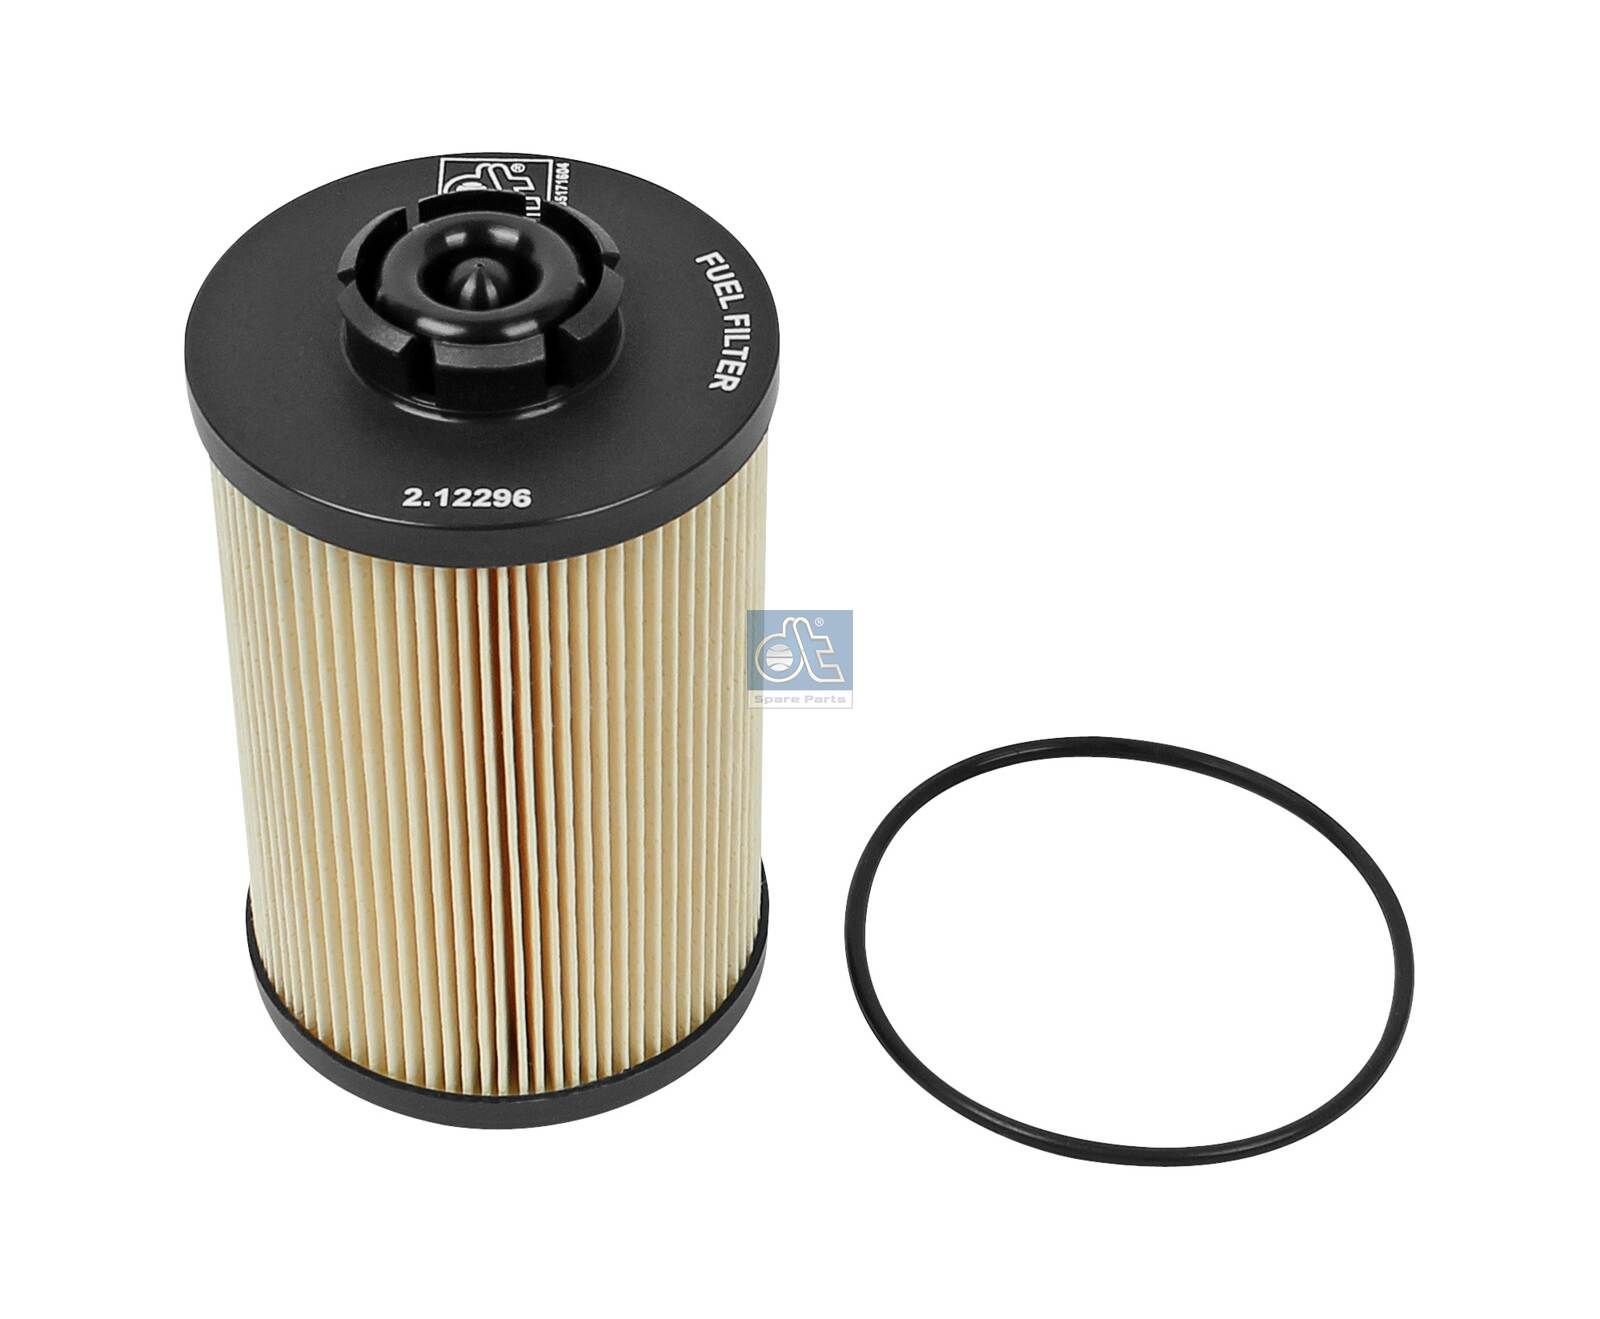 PU 1058X DT Spare Parts 2.12296 Fuel filter 21 276 079